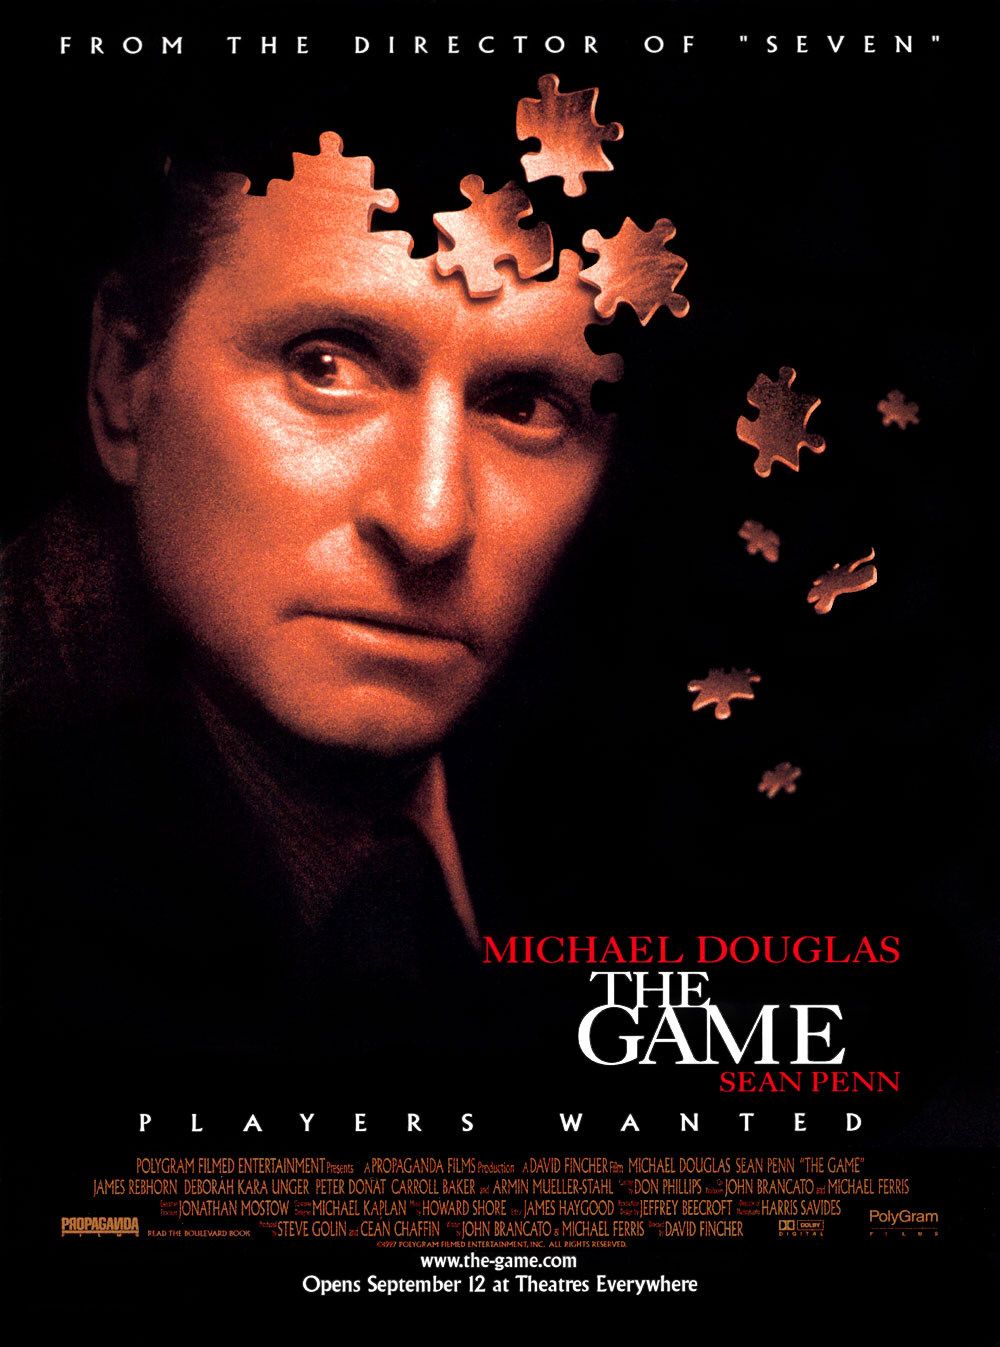 the-game-film-poster.jpg